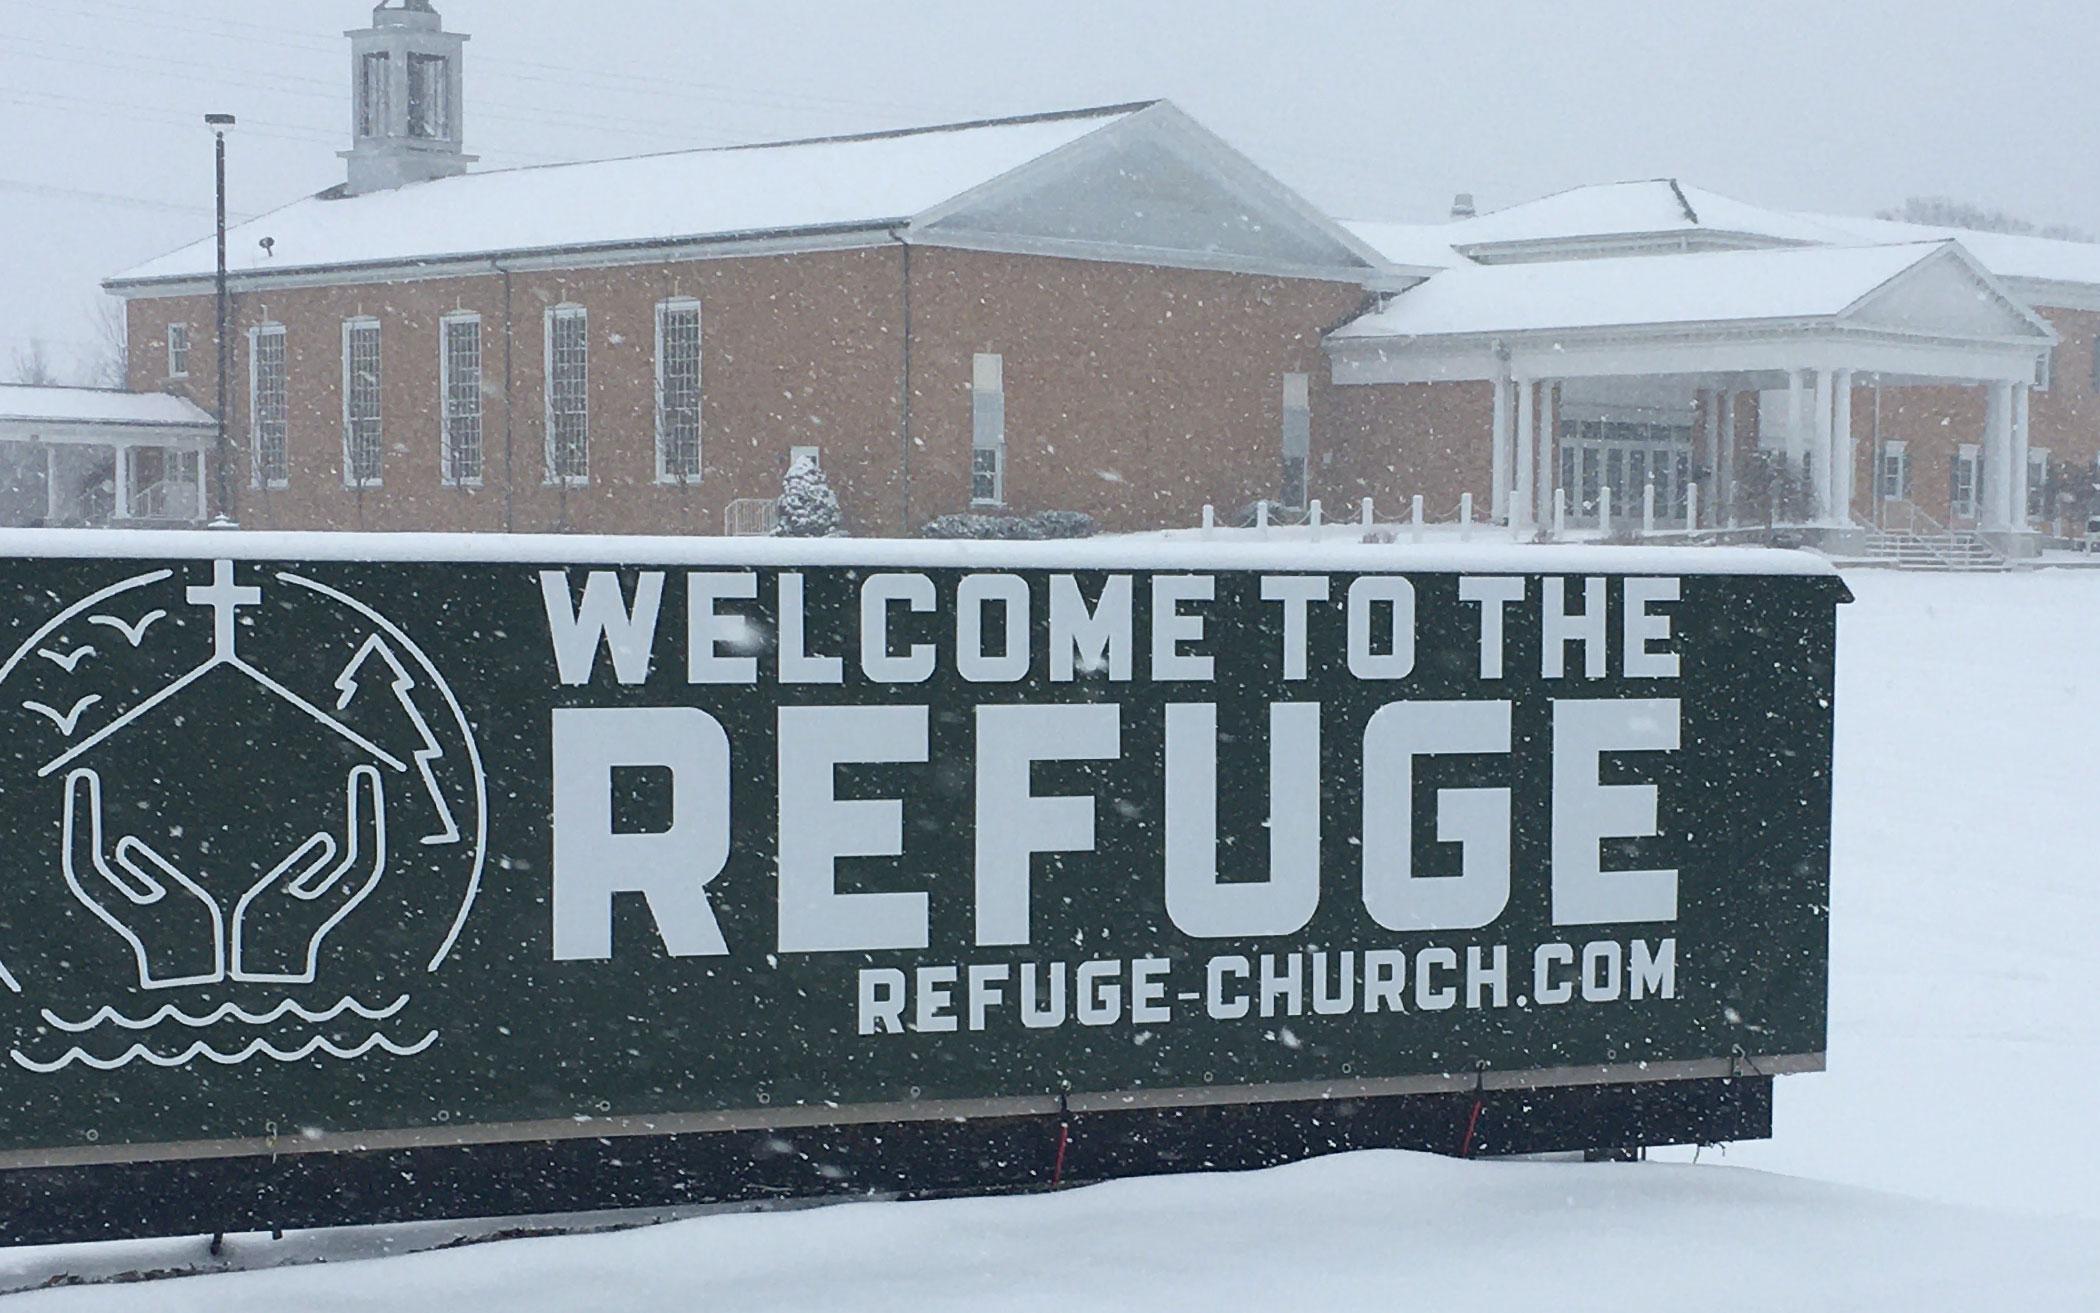 Now a small congregation with a big building, the remaining members of Trinity CRC have embraced their mission as The Refuge.